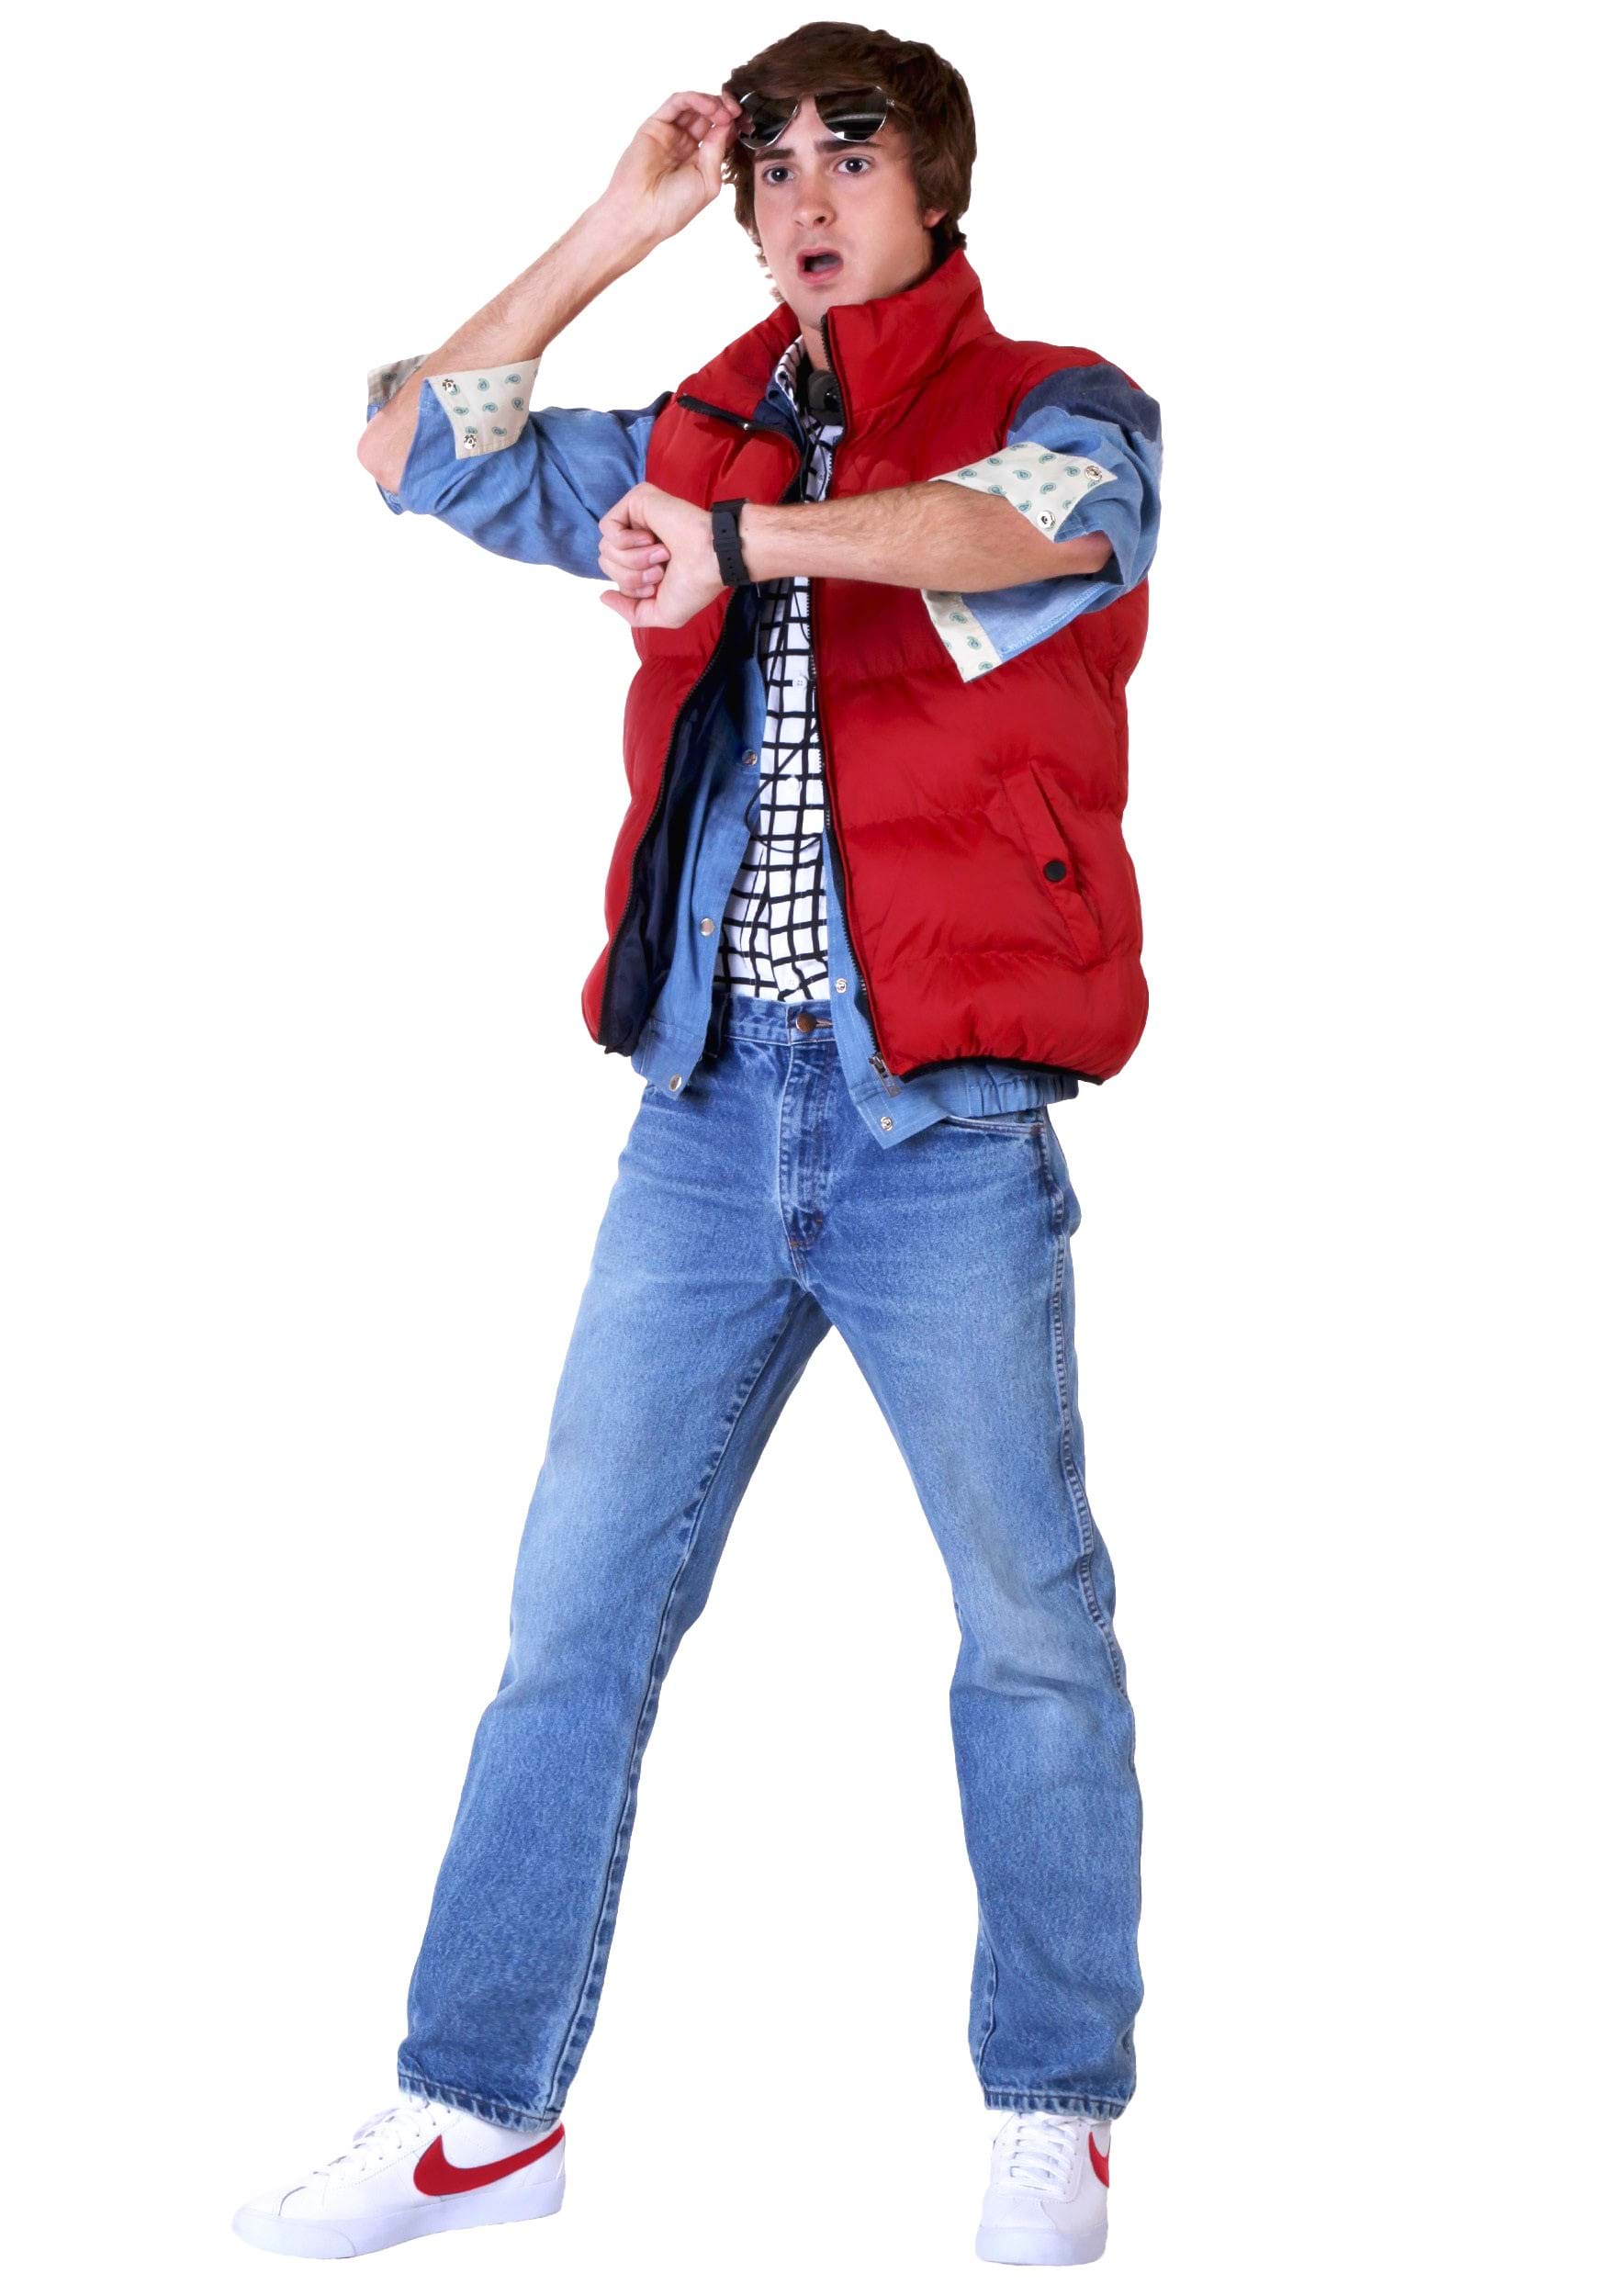 Back To The Future Marty McFly Costume , 80s Movies Costume